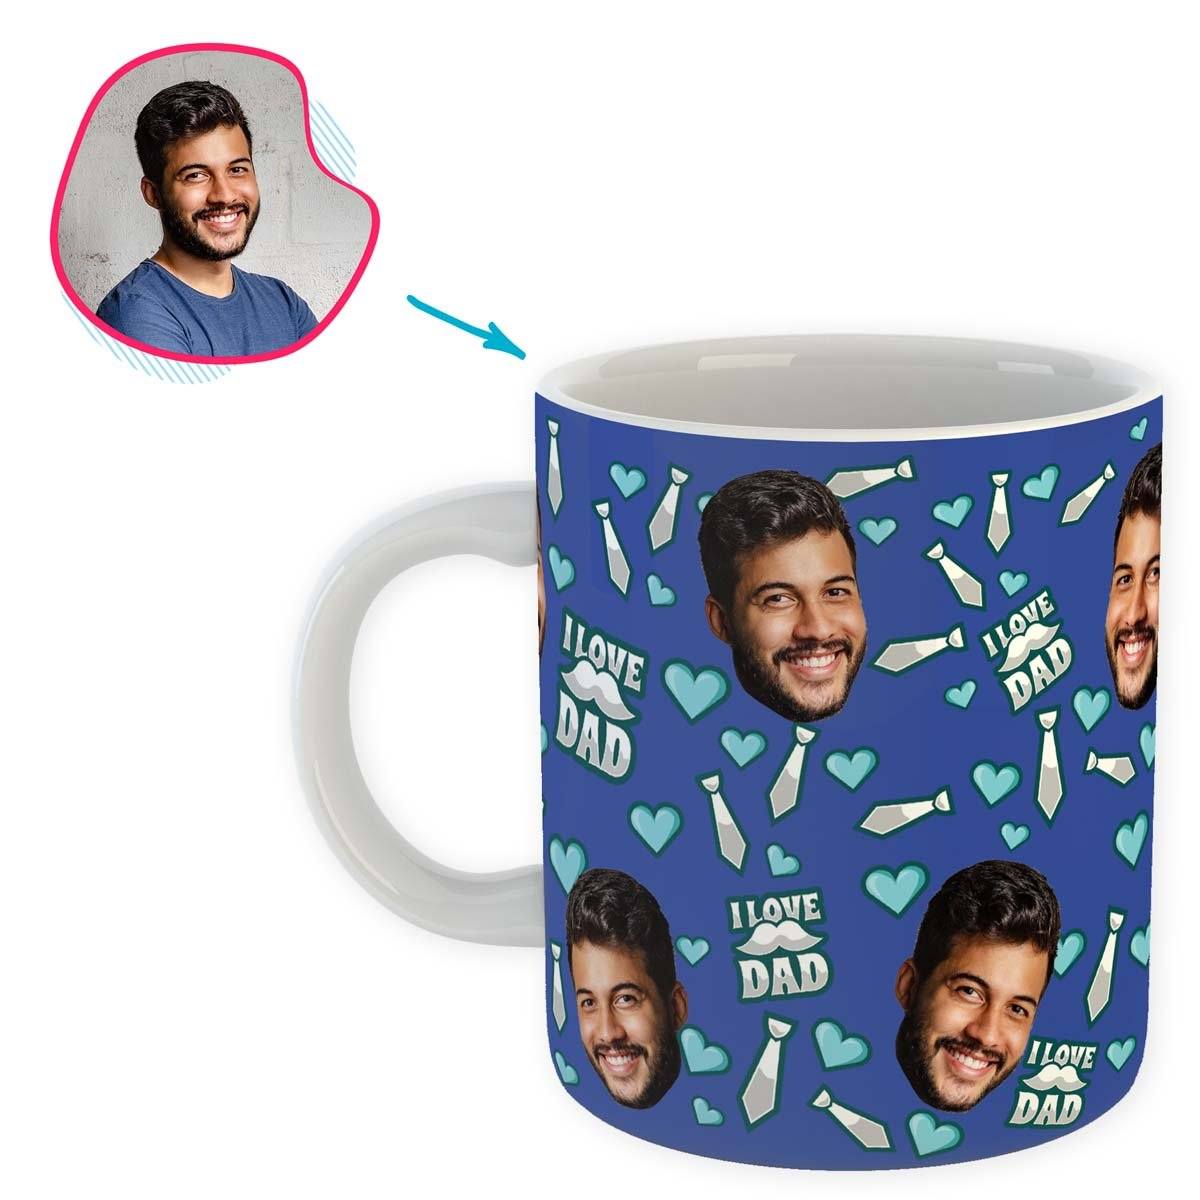 darkblue Love Dad mug personalized with photo of face printed on it